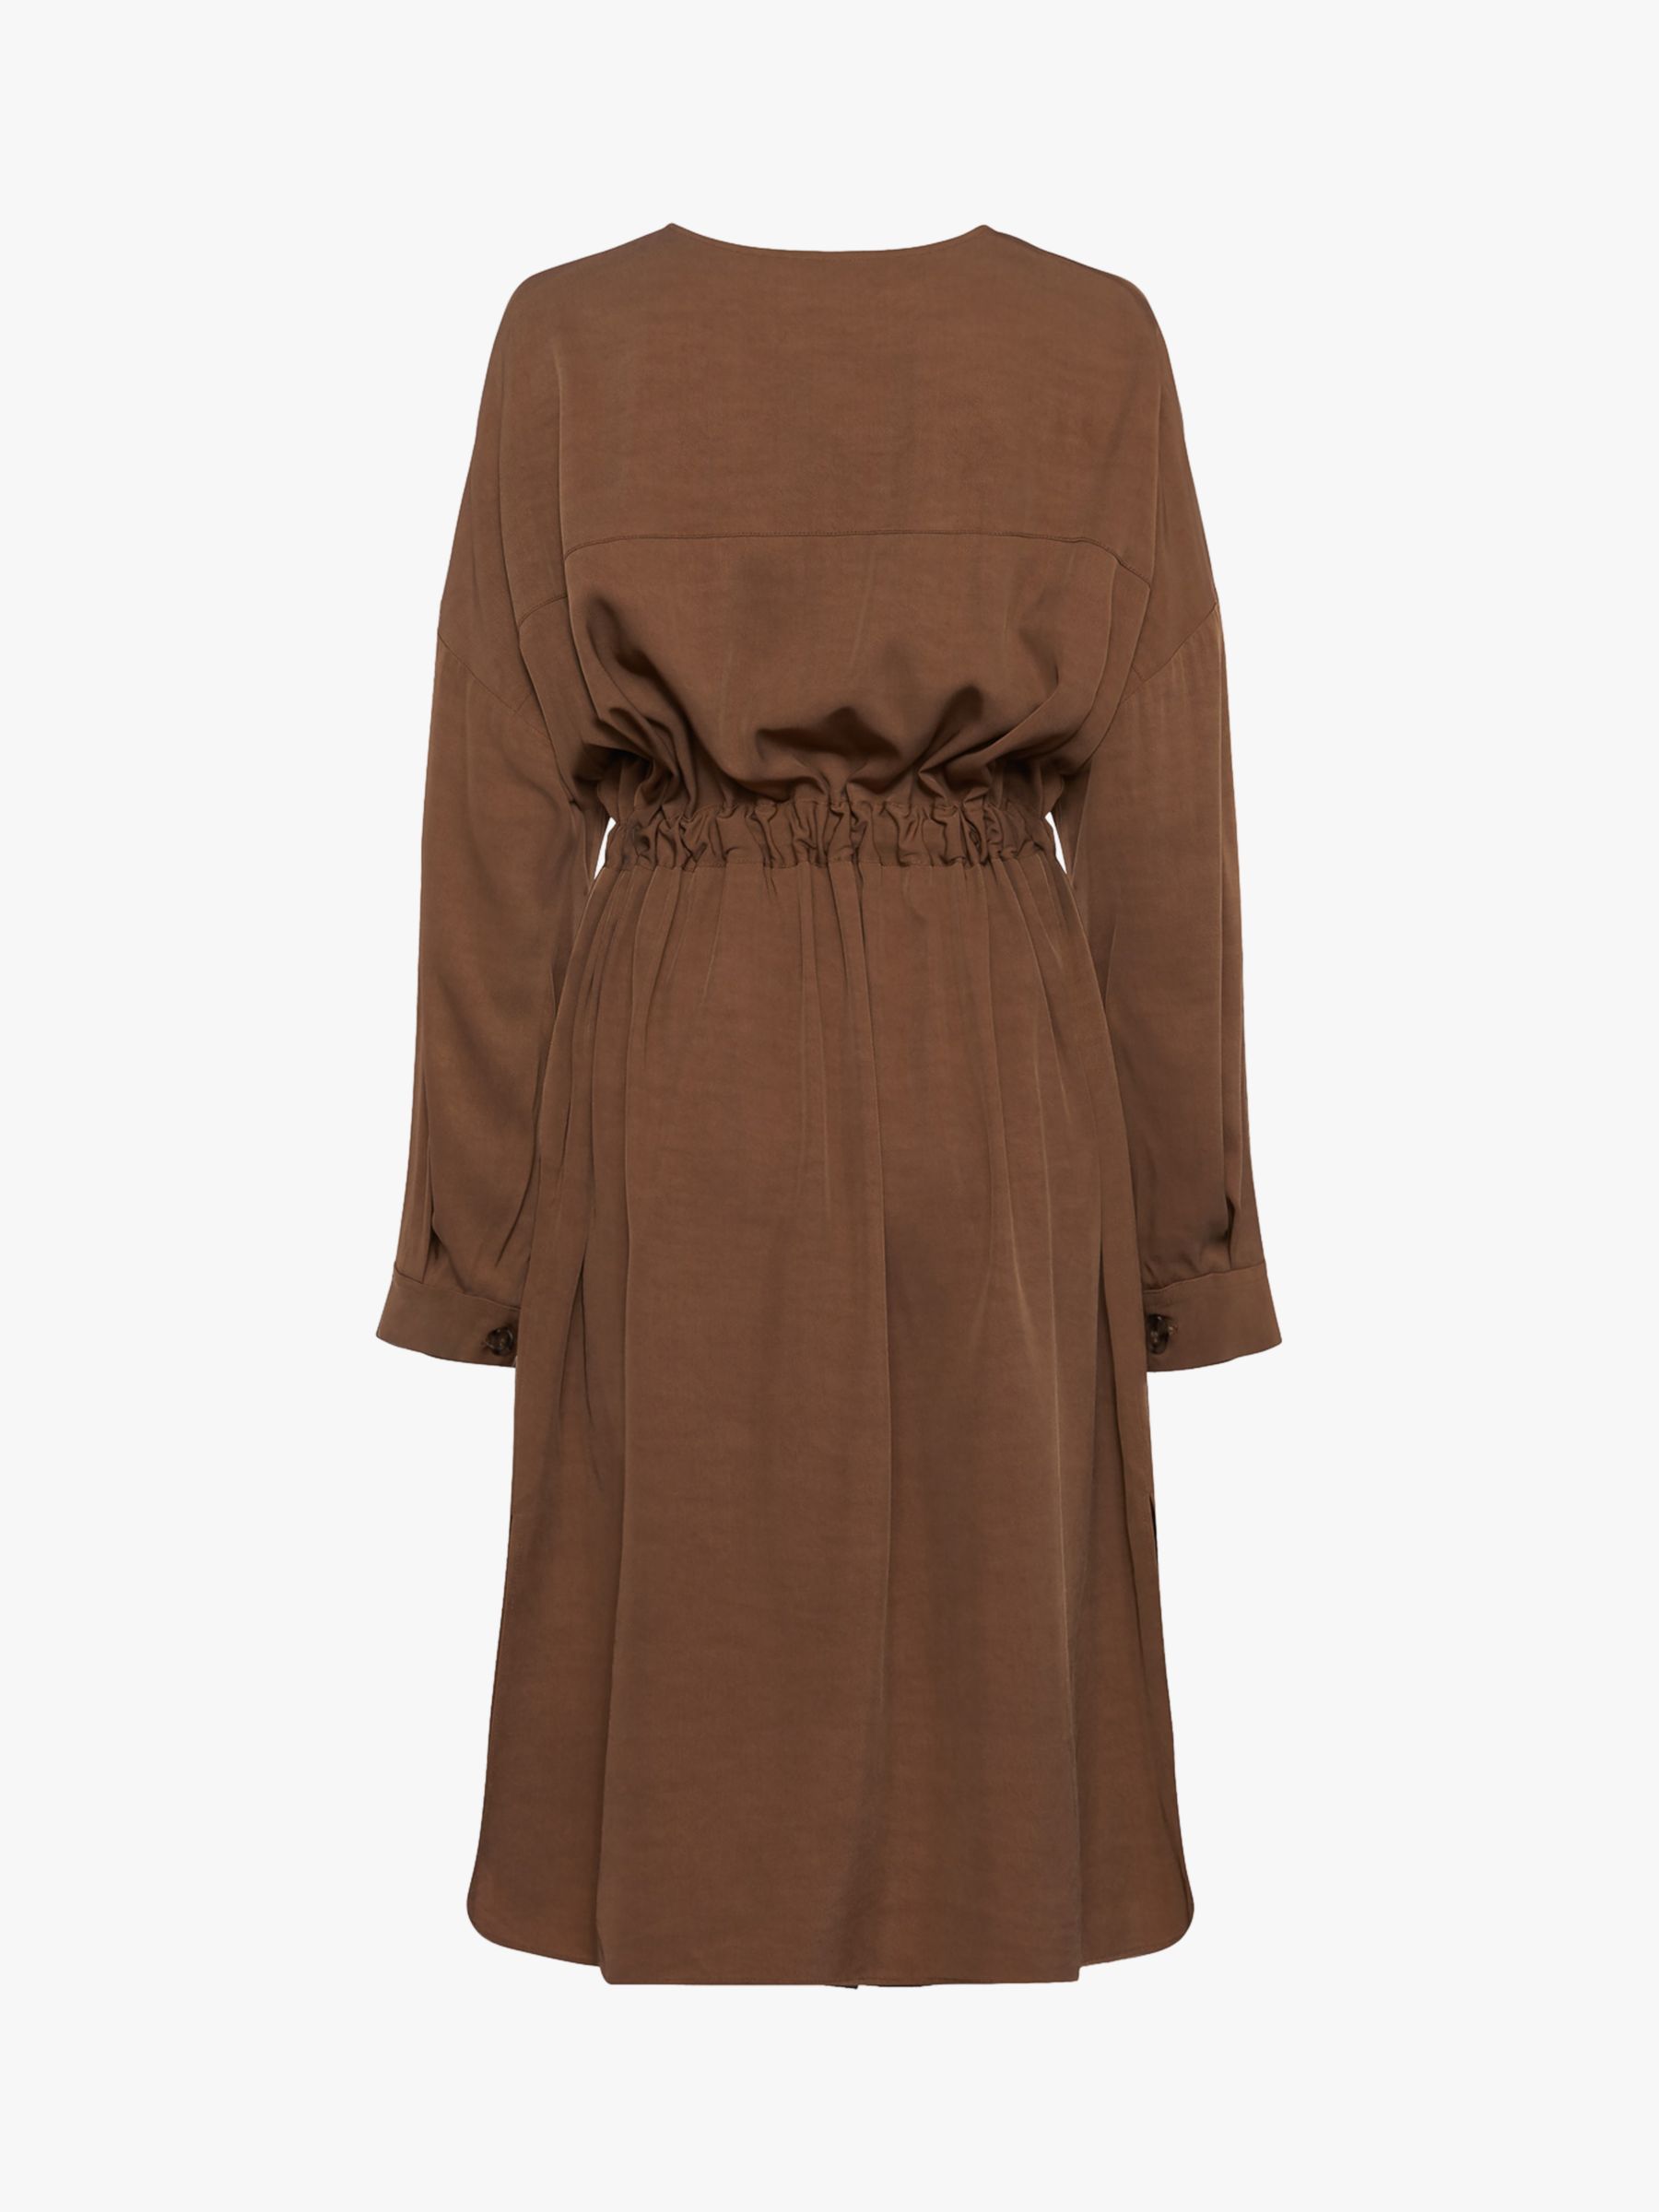 Buy French Connection Baina Twill Belted Midi Dress, Warm Sand Online at johnlewis.com